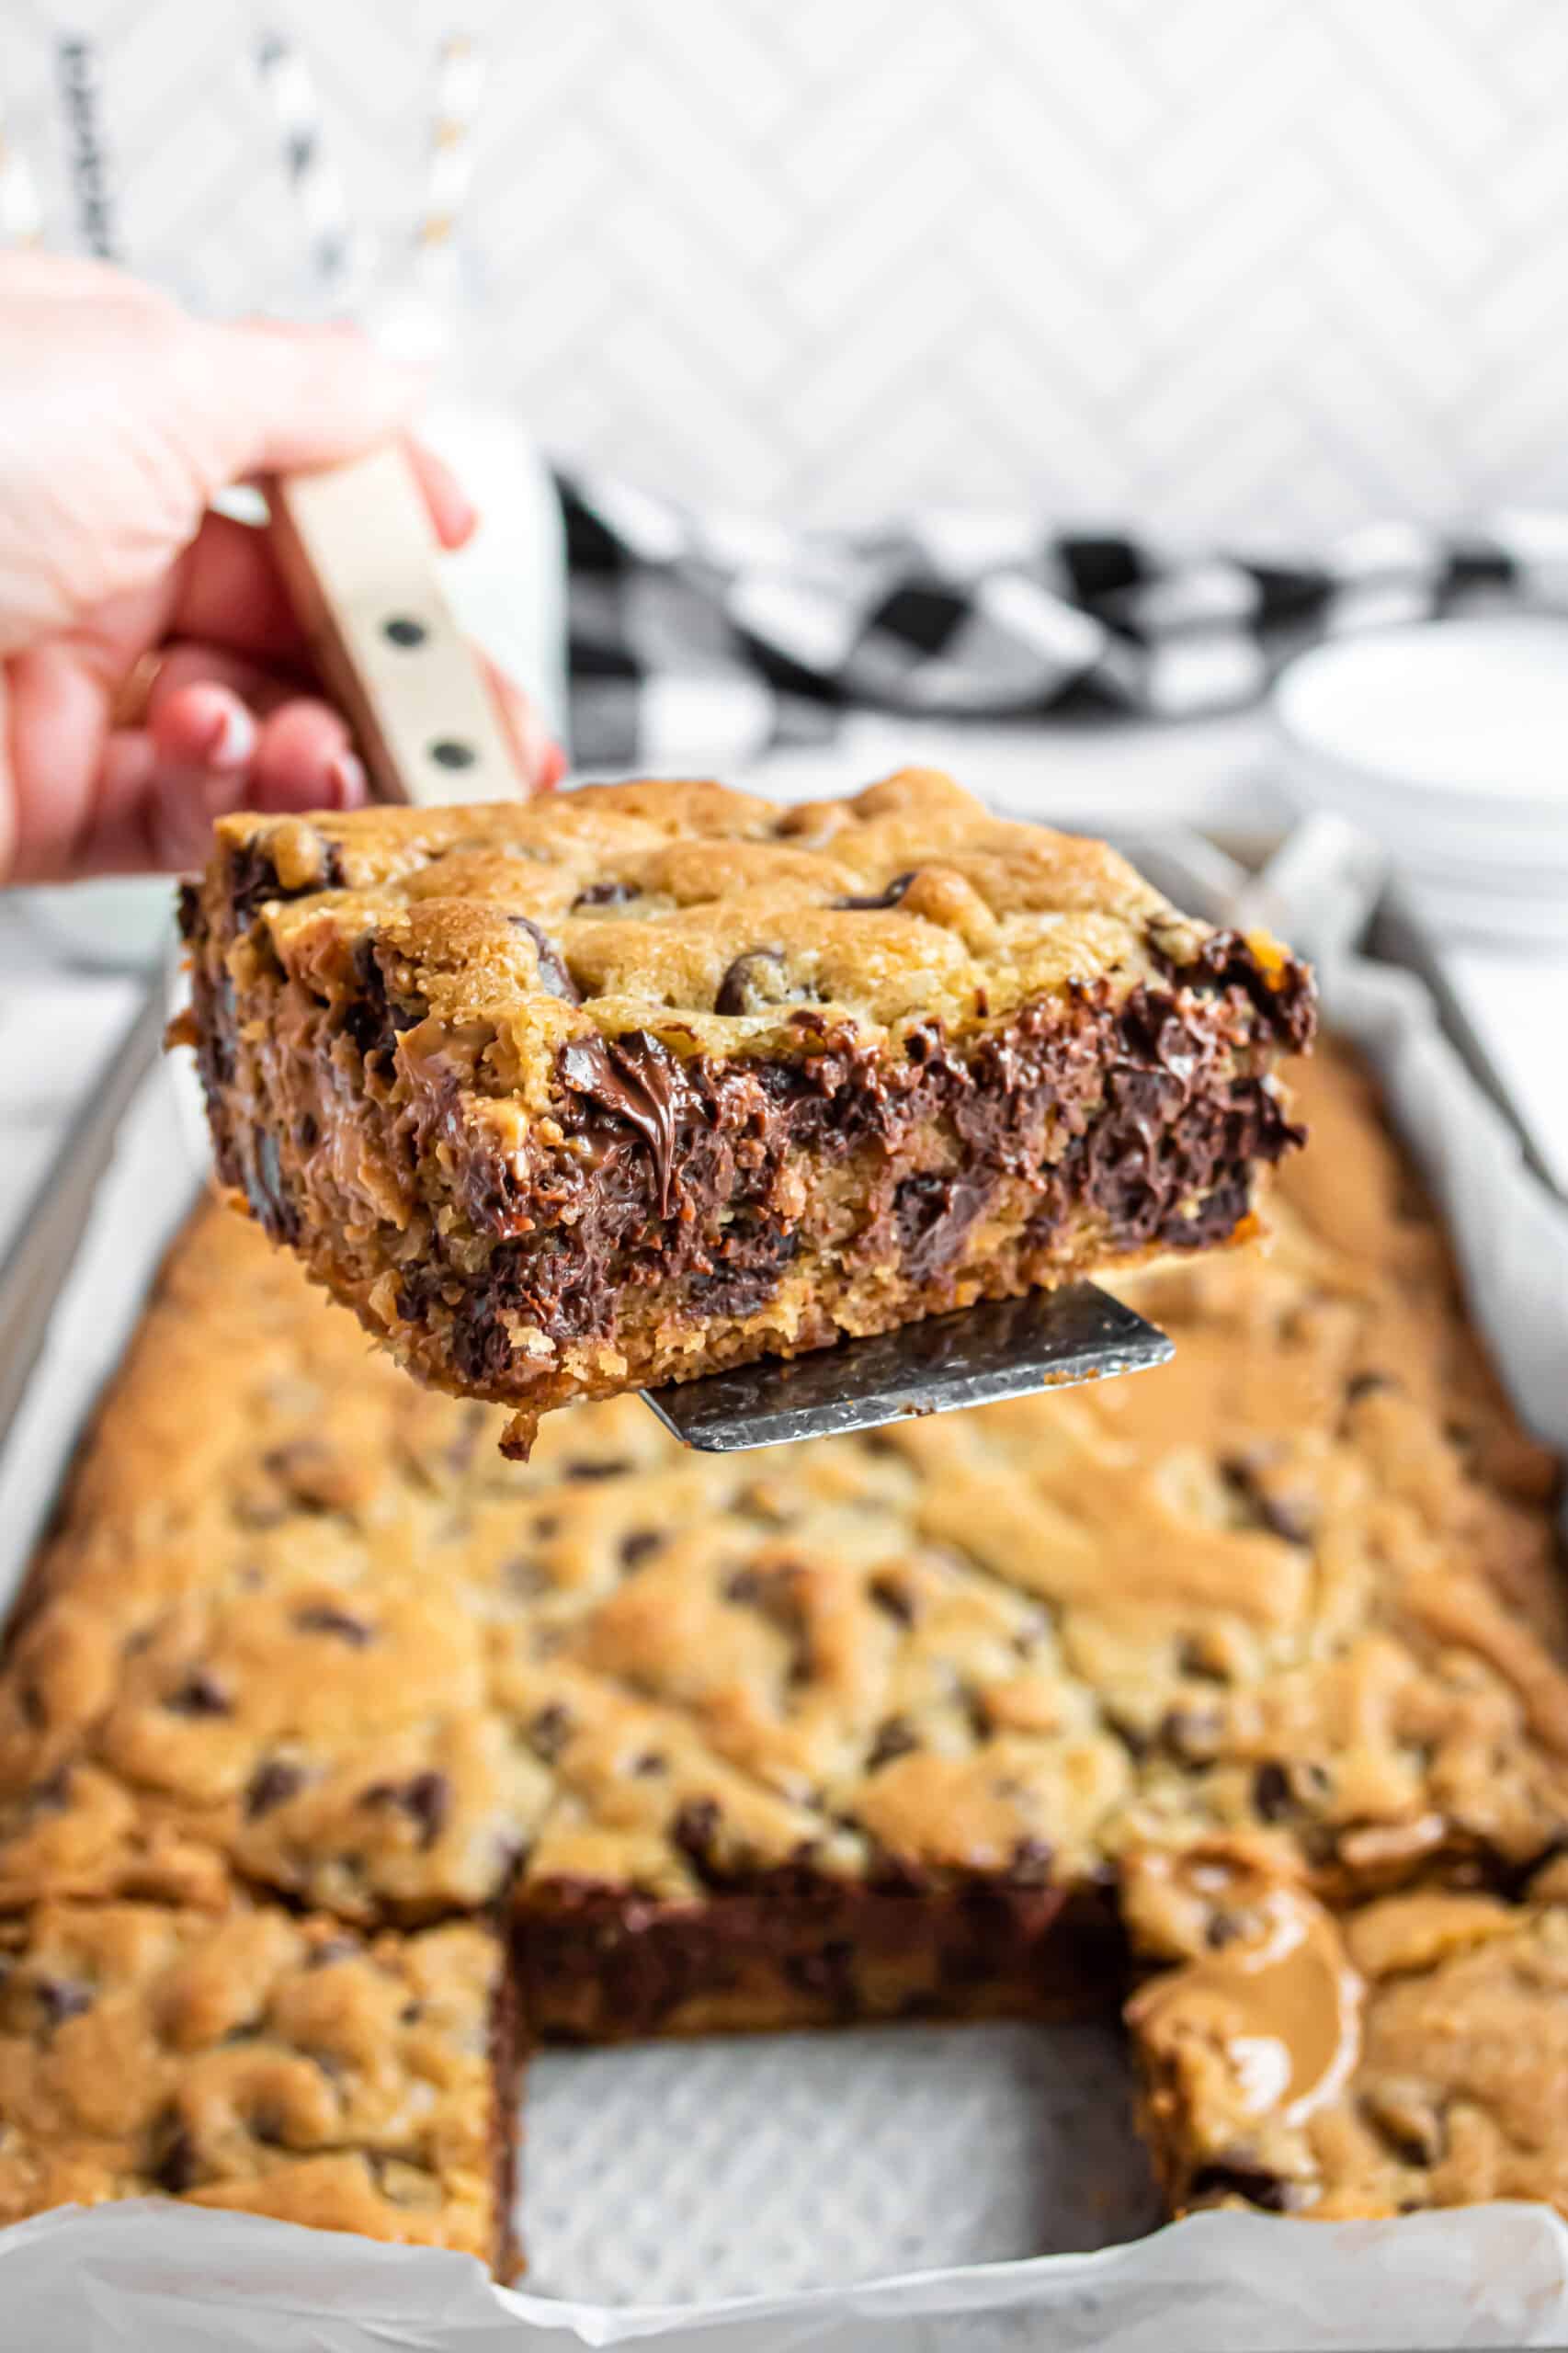 Slice of peanut butter chocolate chip bars being lifted on a spatula.